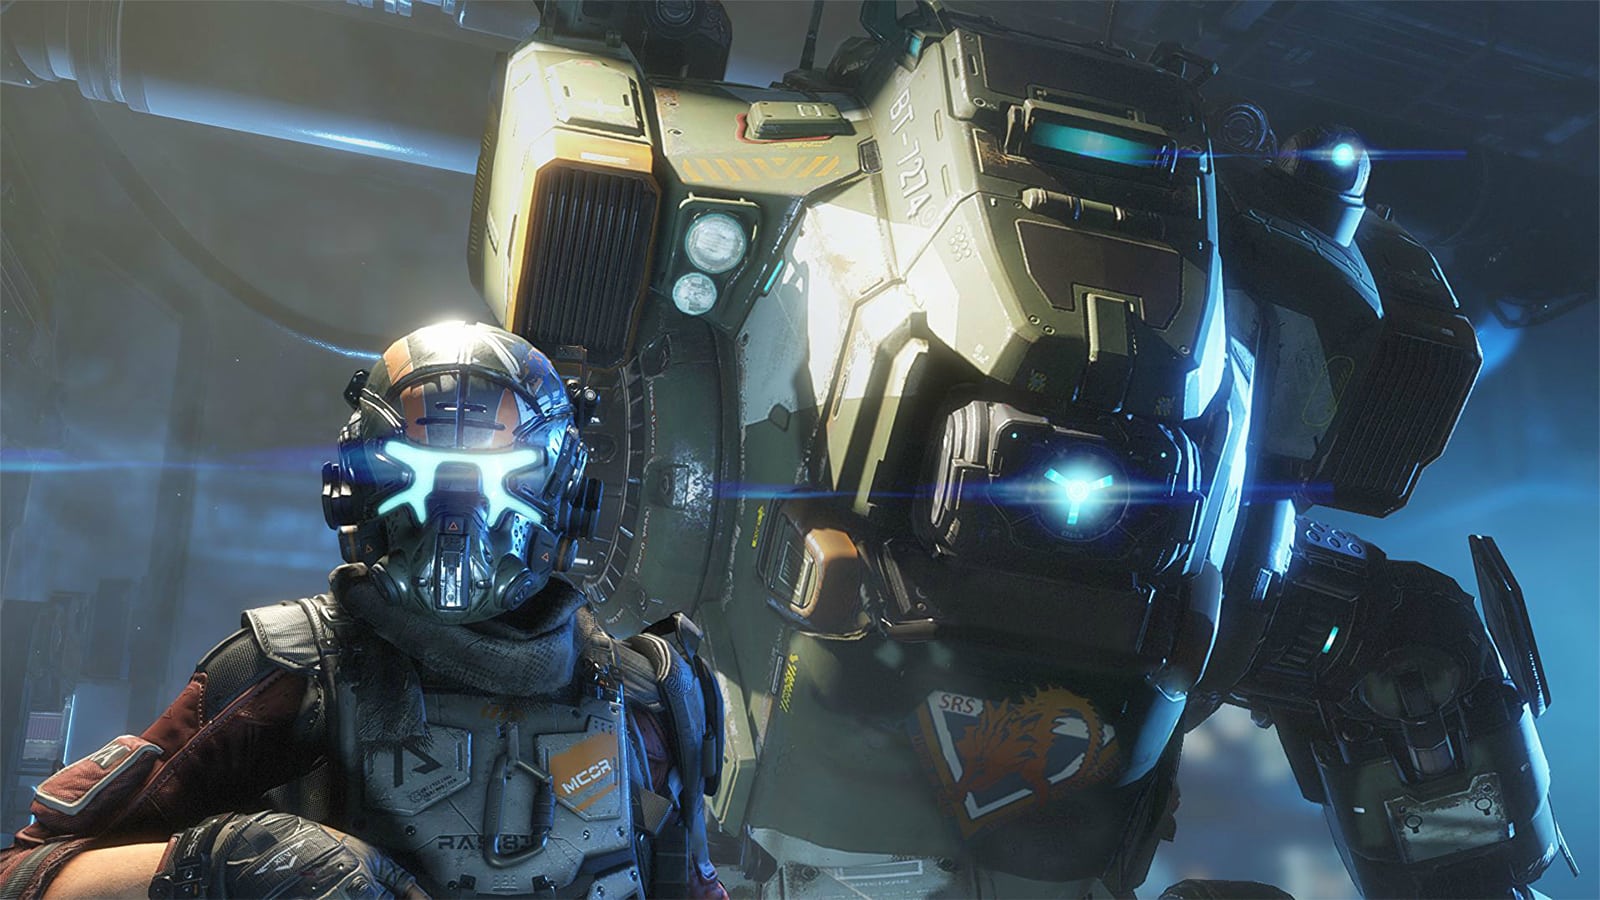 Titanfall 2 Servers Hit By Hackers, Respawn Has '1-2' People Working On A  Security Fix - Game Informer